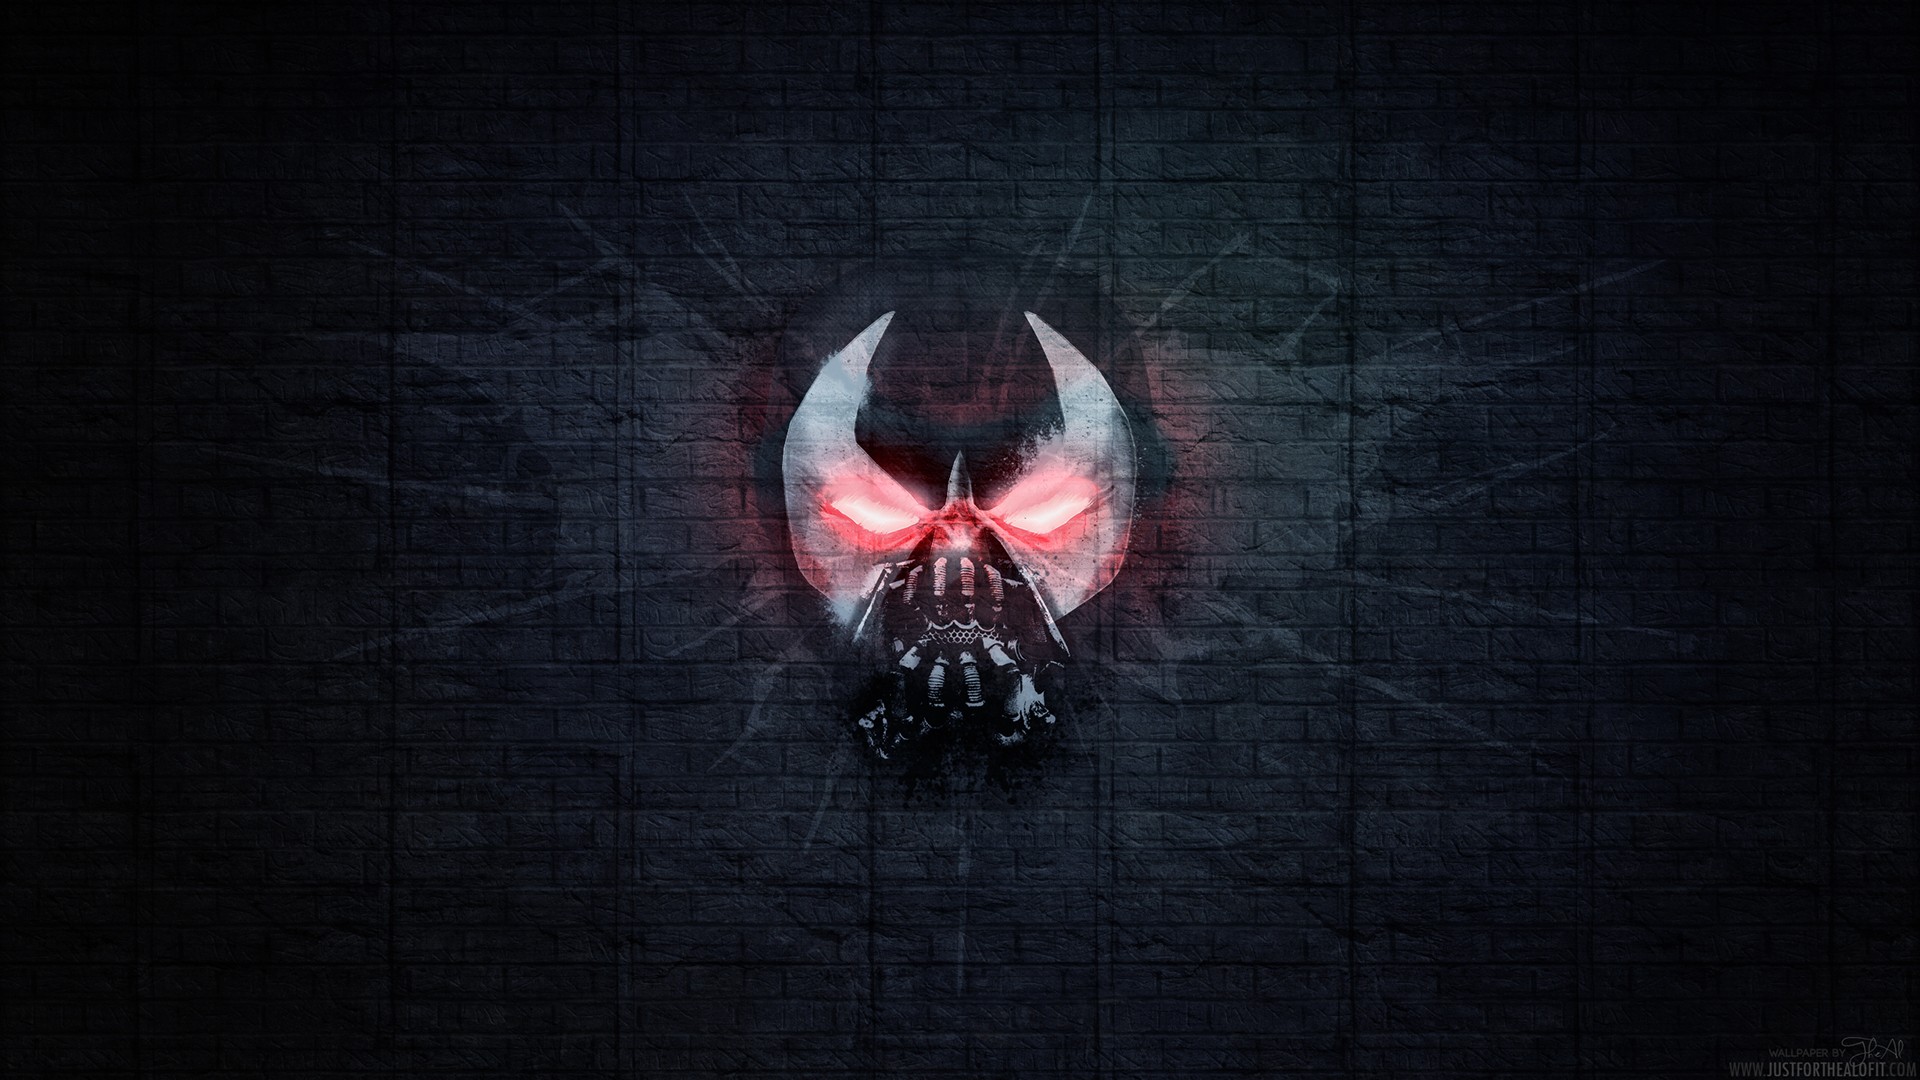 Download the Bane Wallpaper, Bane iPhone Wallpaper, Bane Android ...